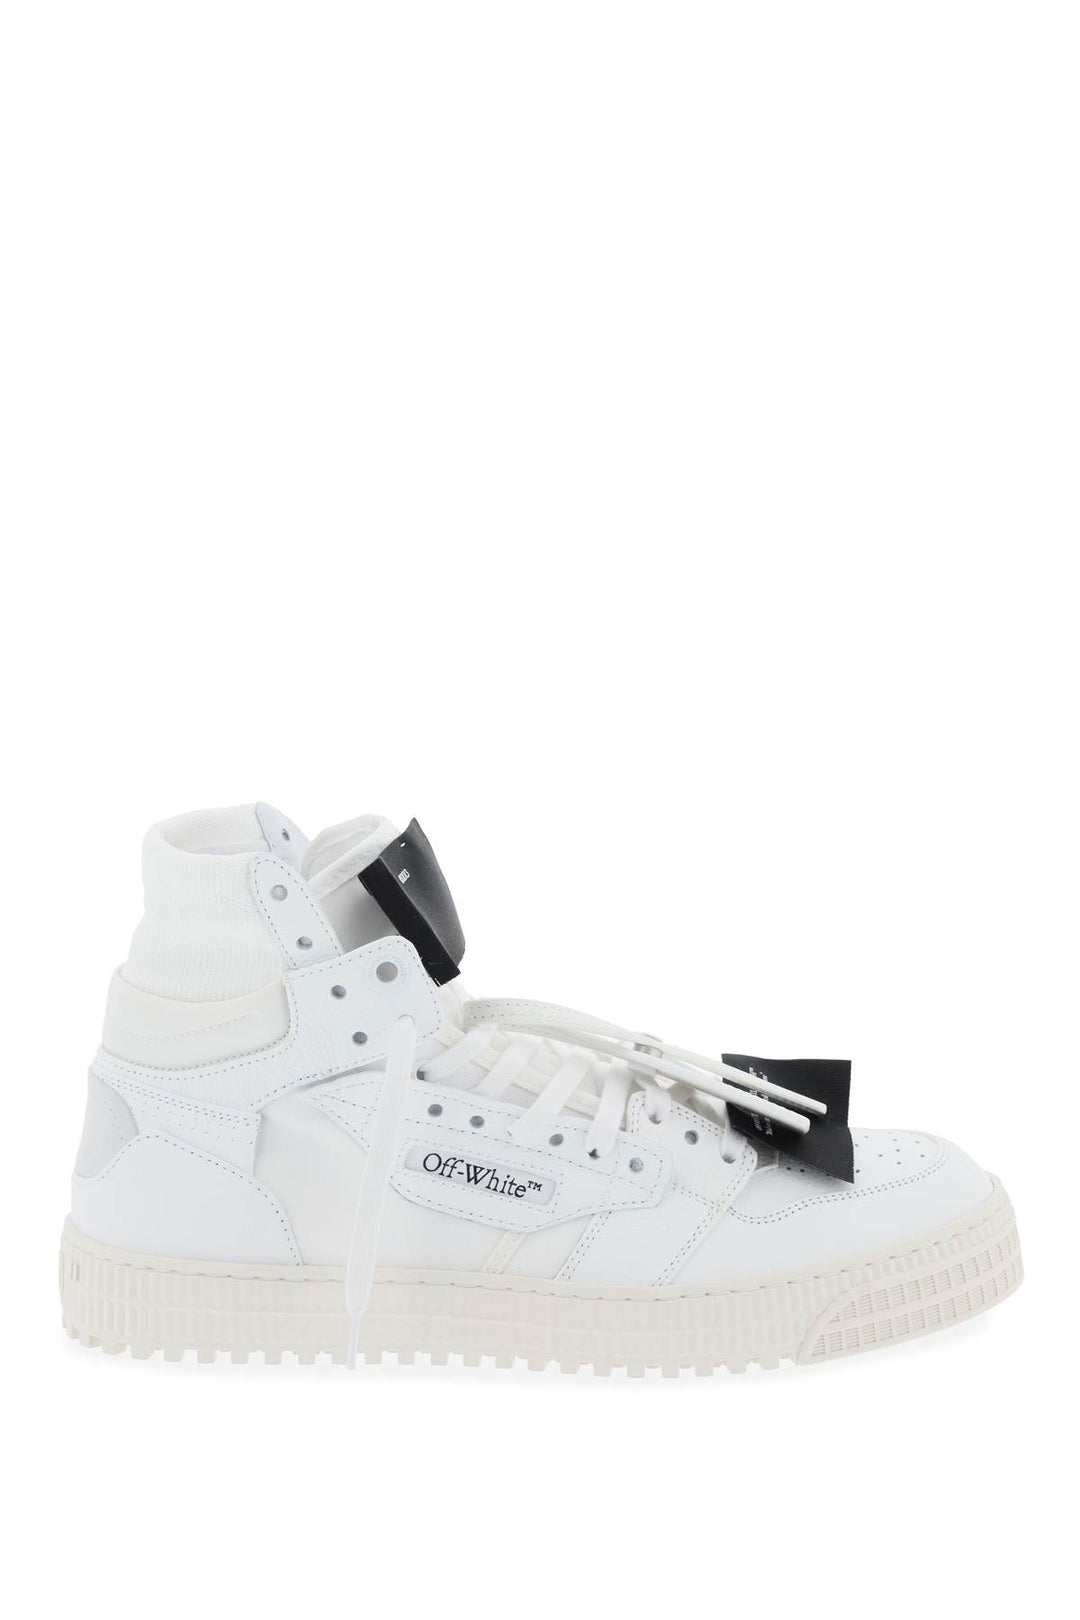 Off White 3.0 Off Court Sneakers   Bianco